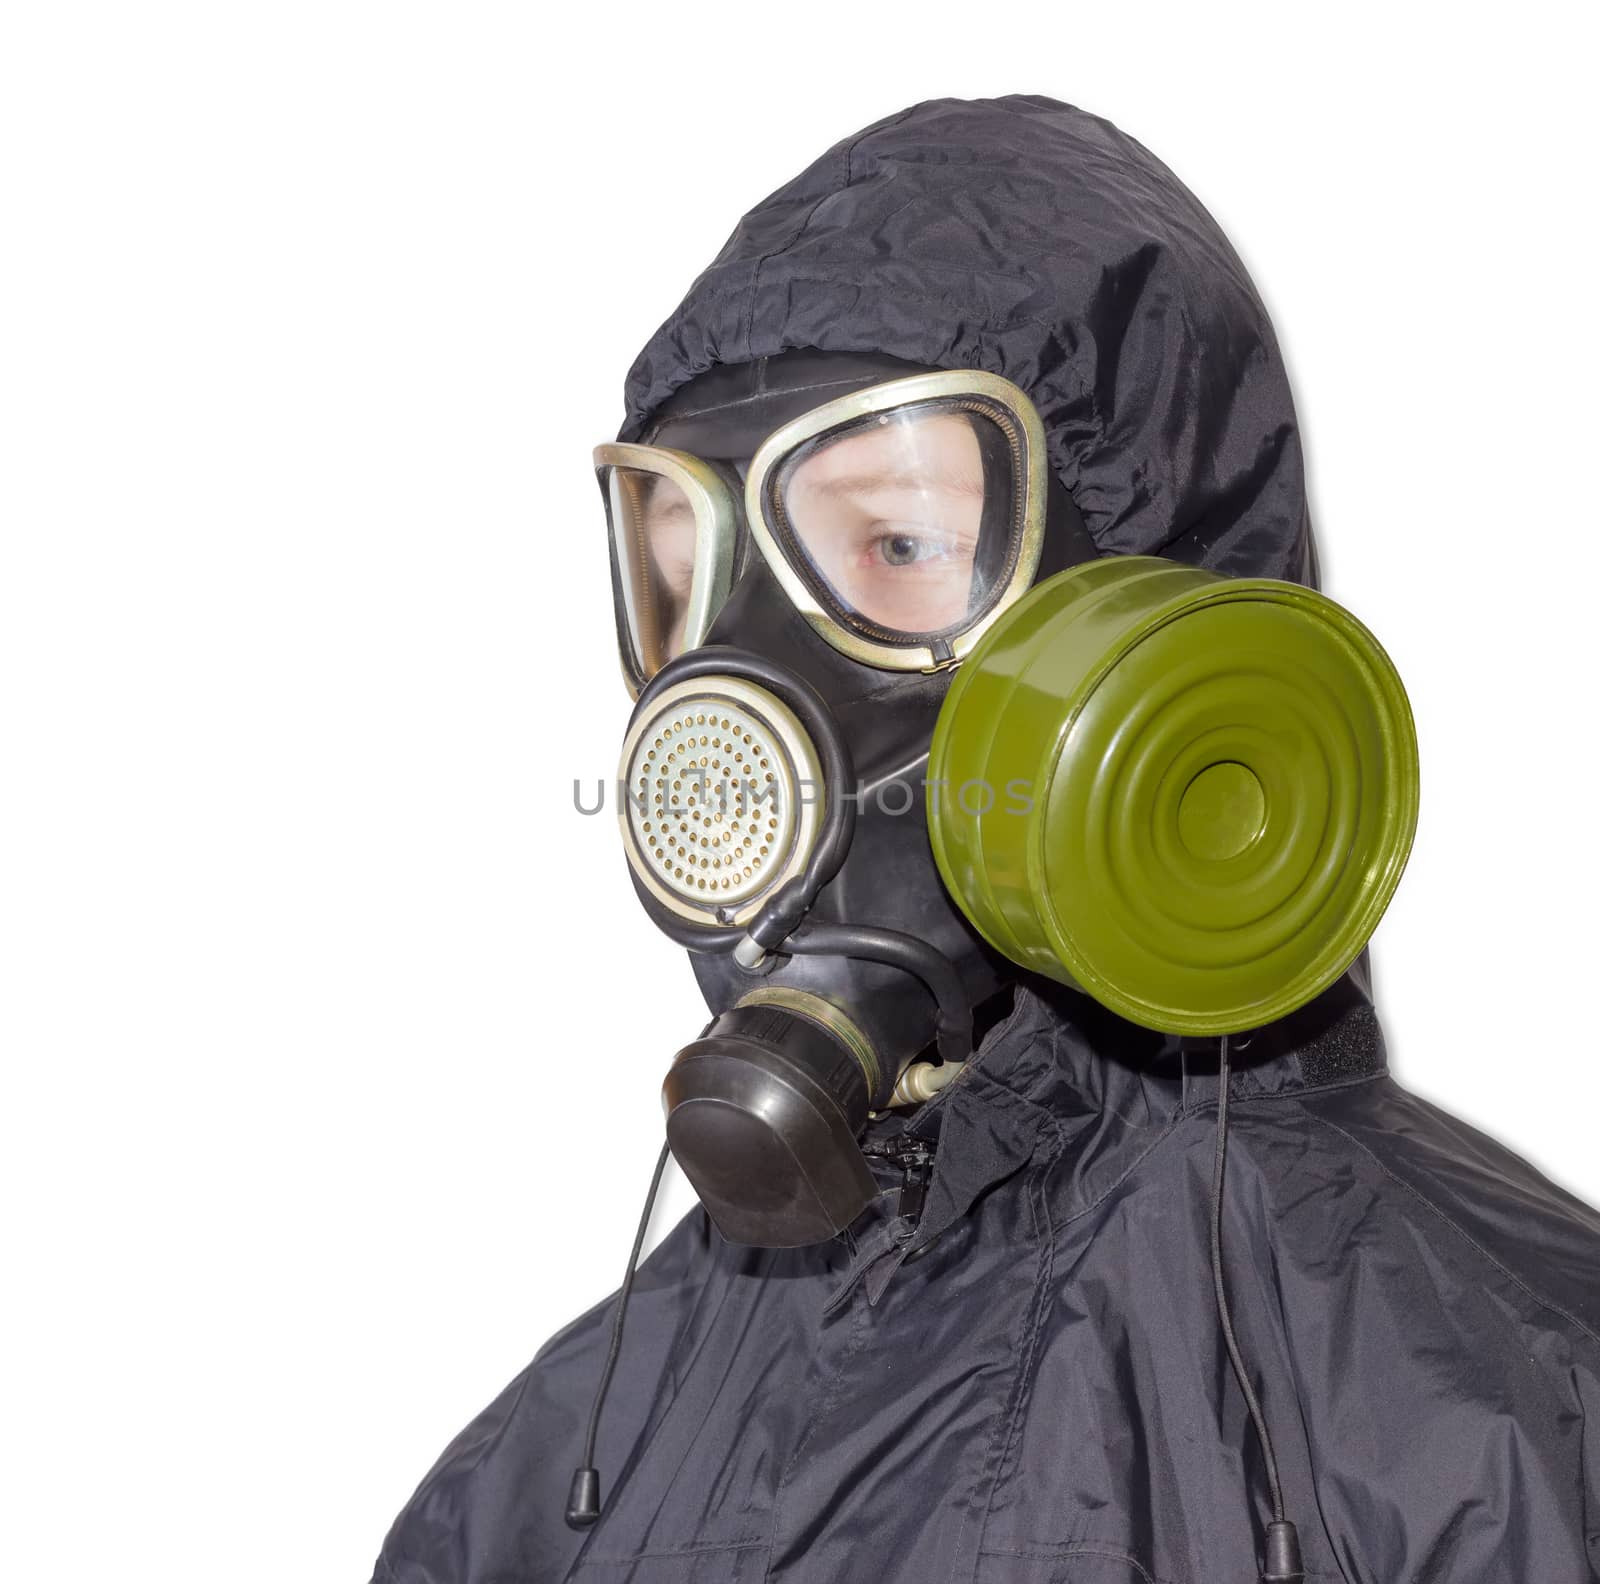 Head and shoulders of a person in a rubber gas mask with filter mounted on side of the mask and drinking tube and in a black jacket with a hood on a light background
